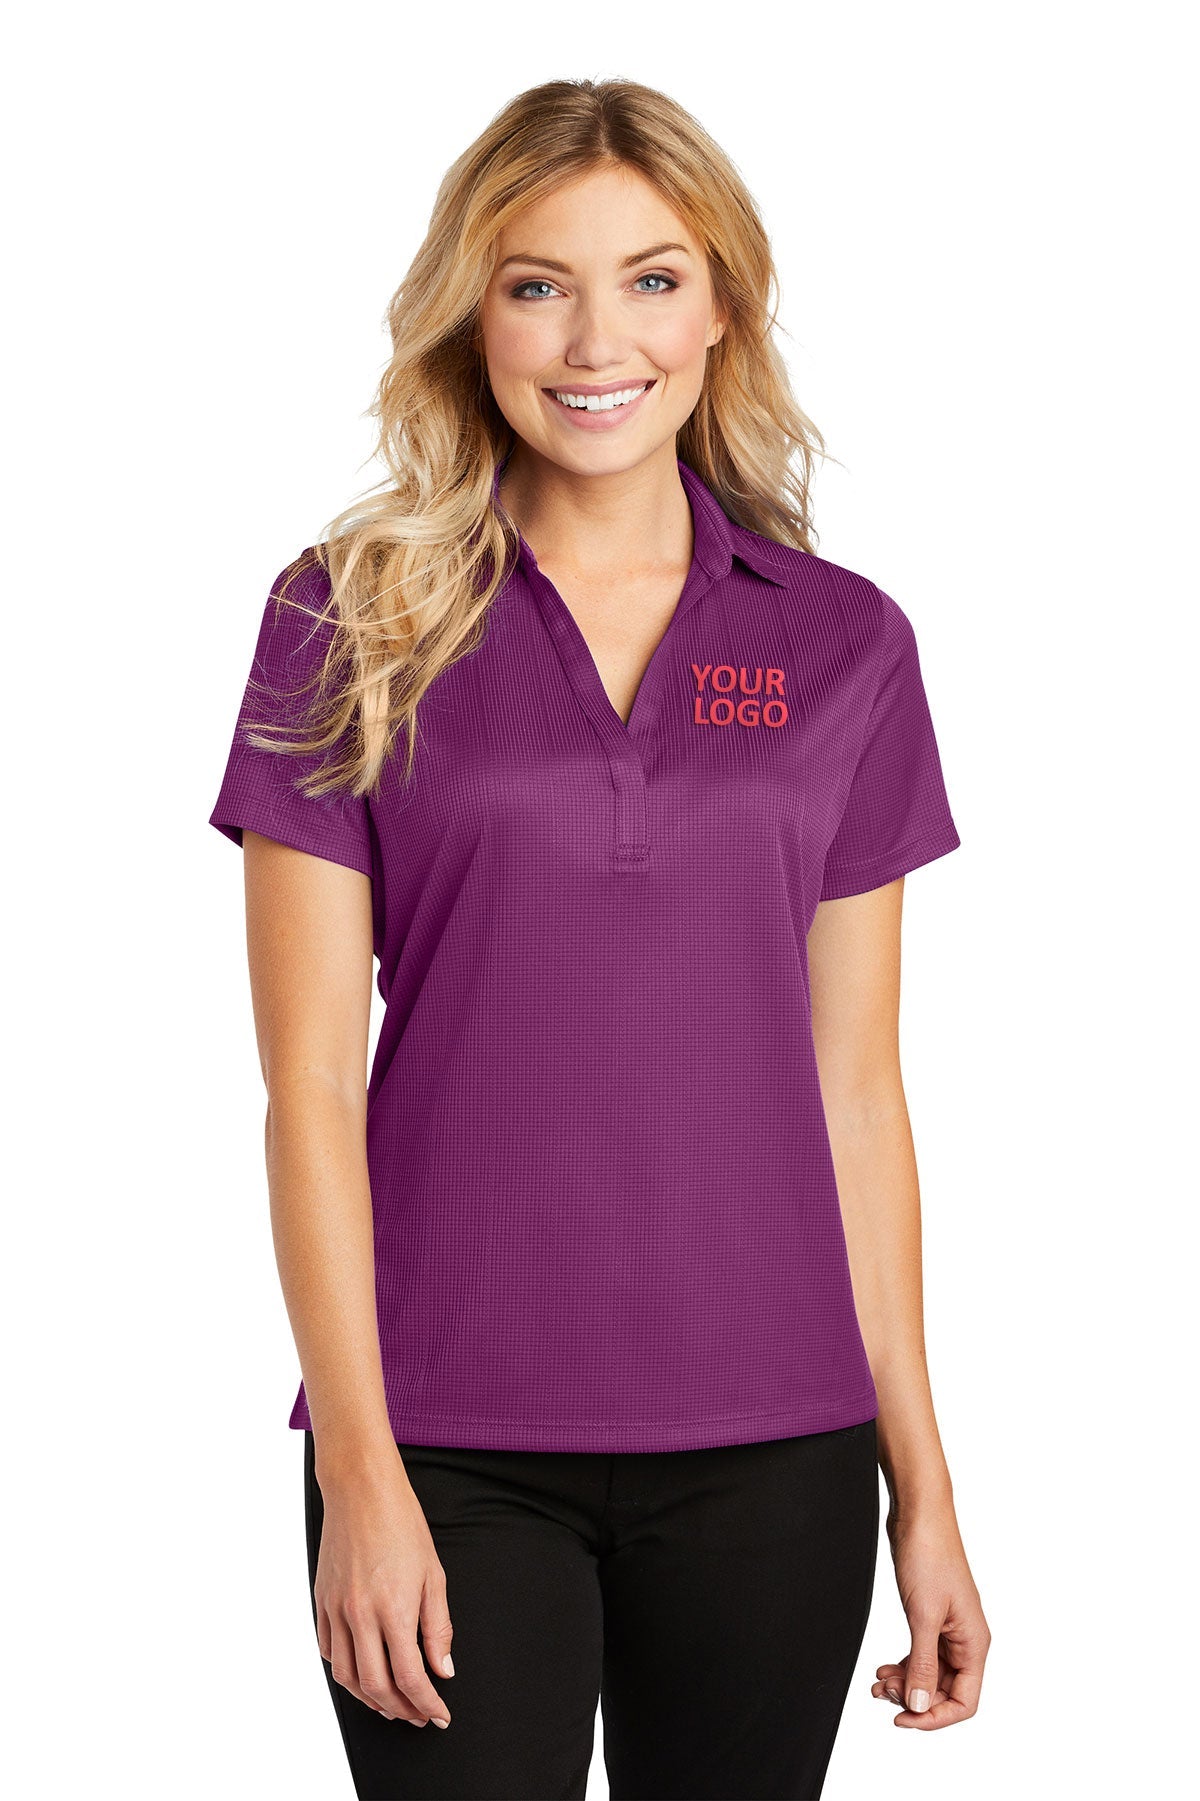 port authority violet purple l528 quality polo shirts with company logo